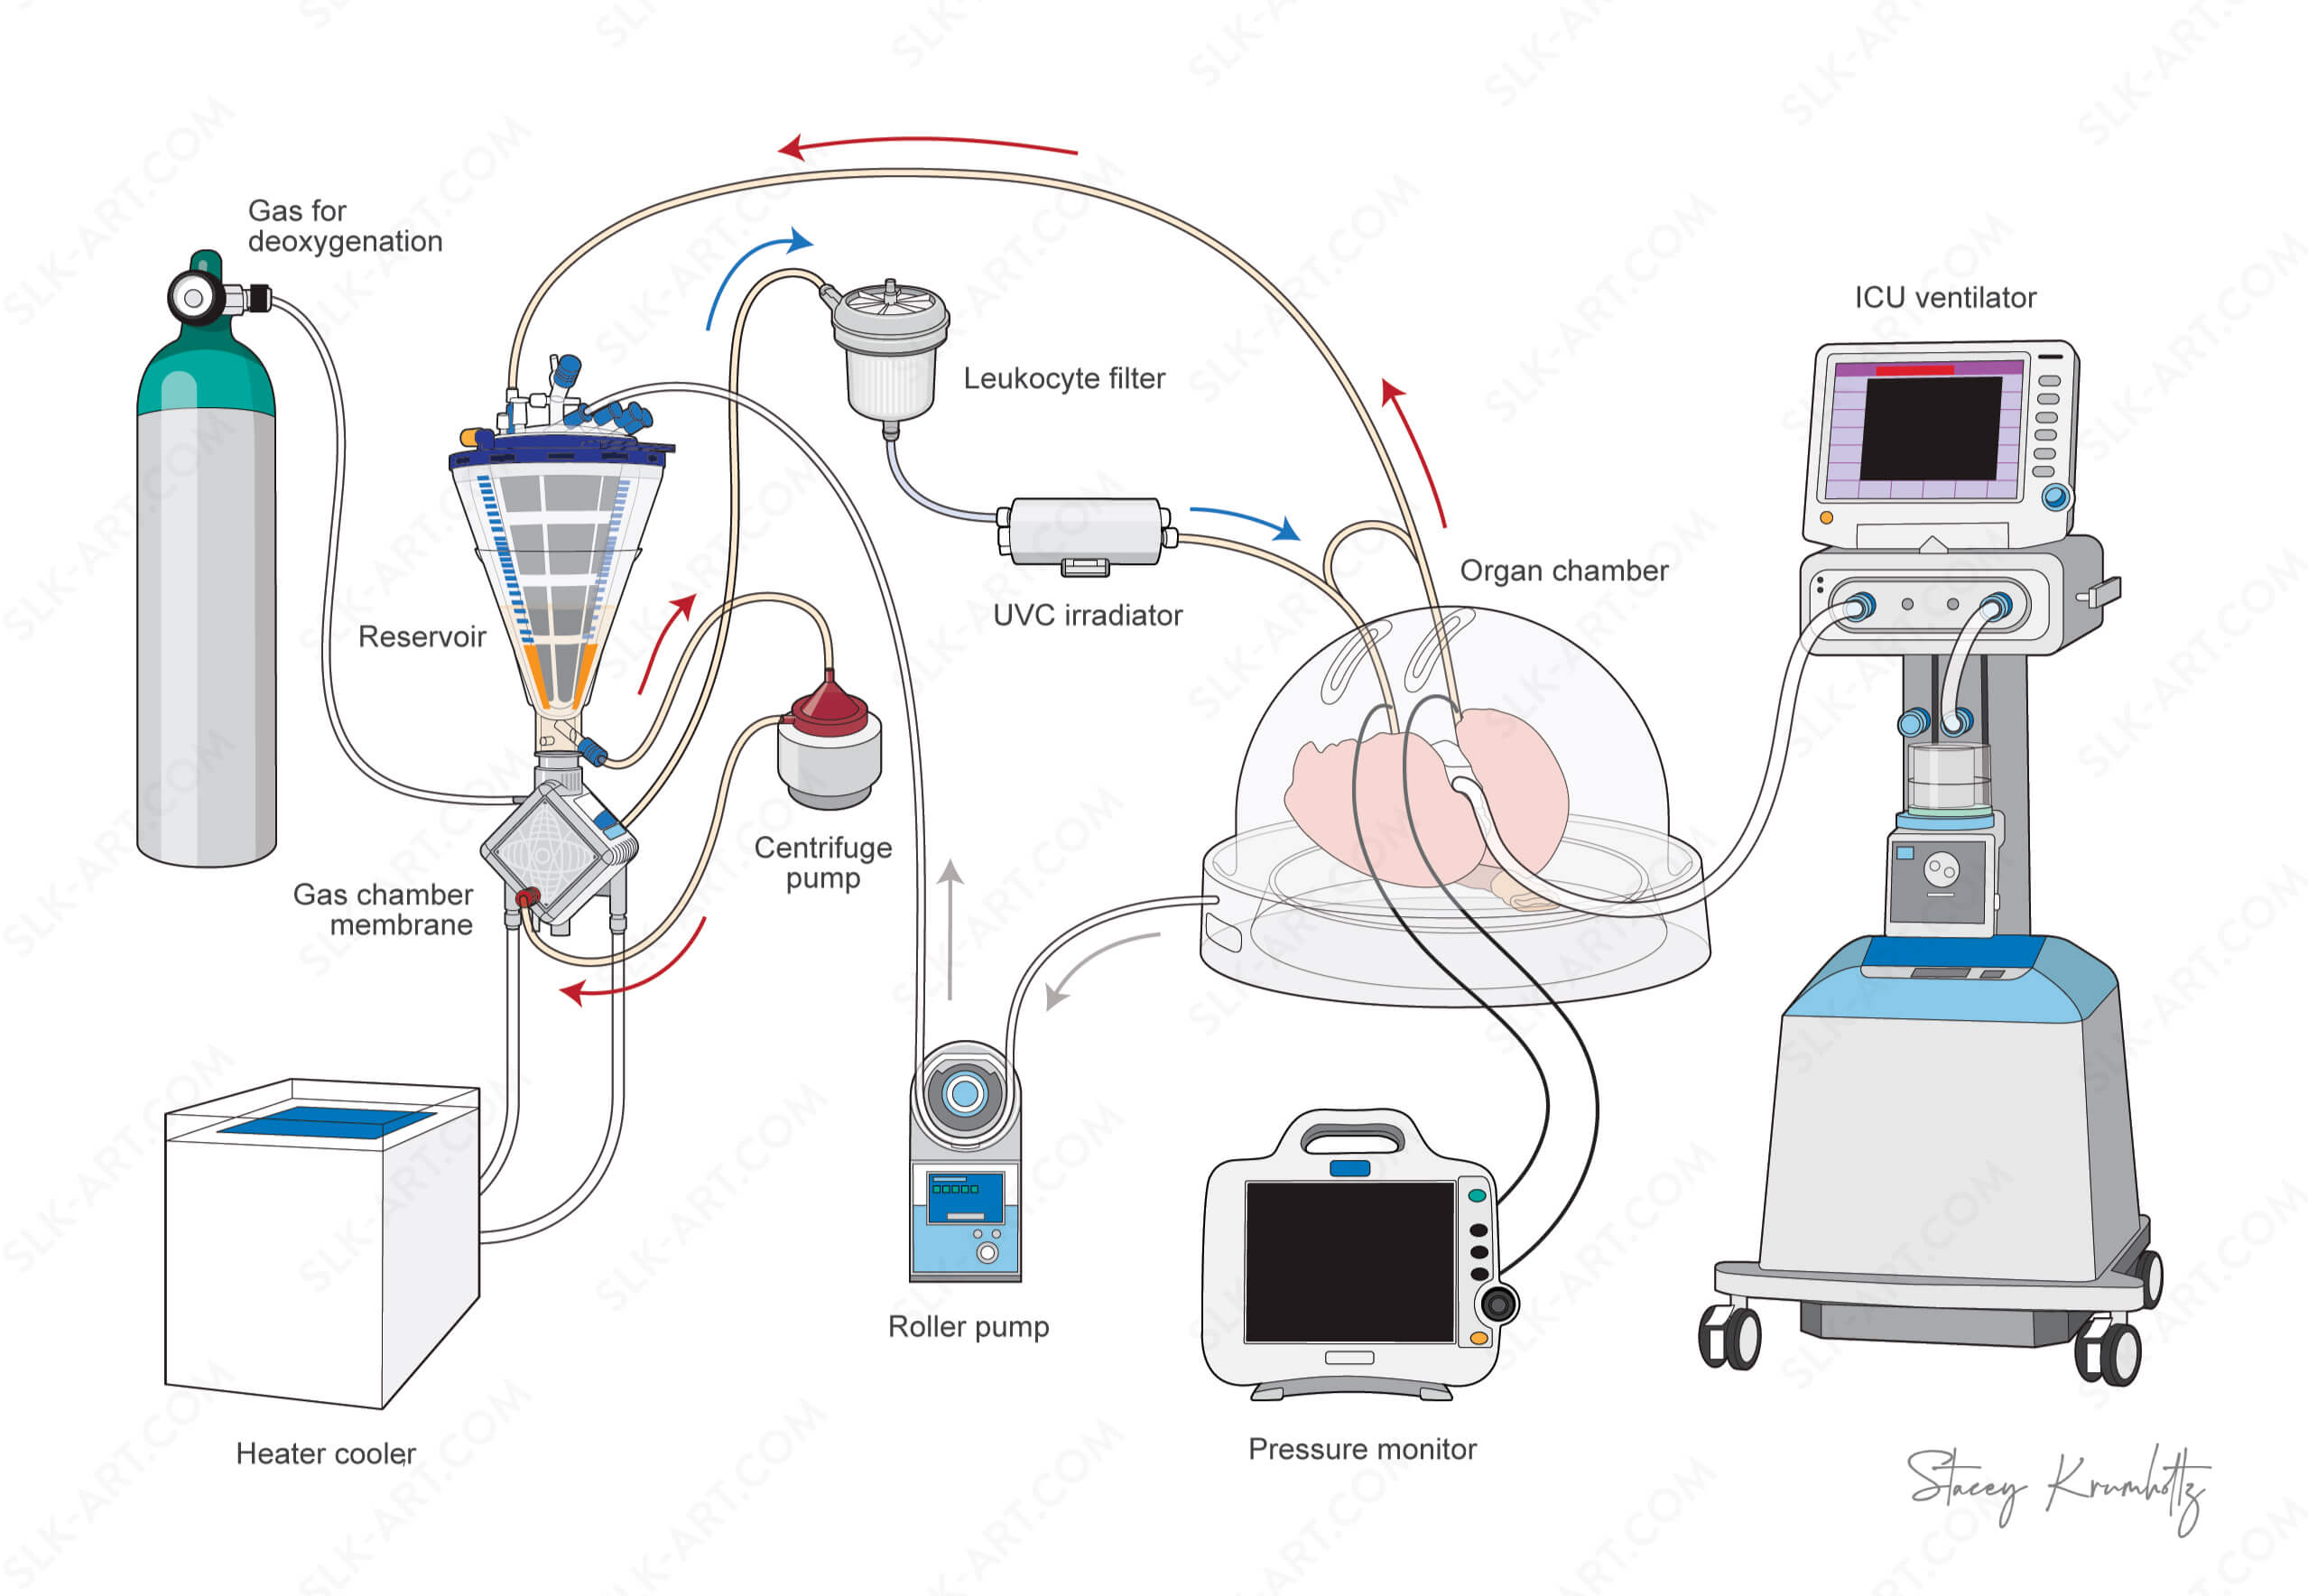 An illustrated diagram of various equipment by Stacey Krumholtz. 